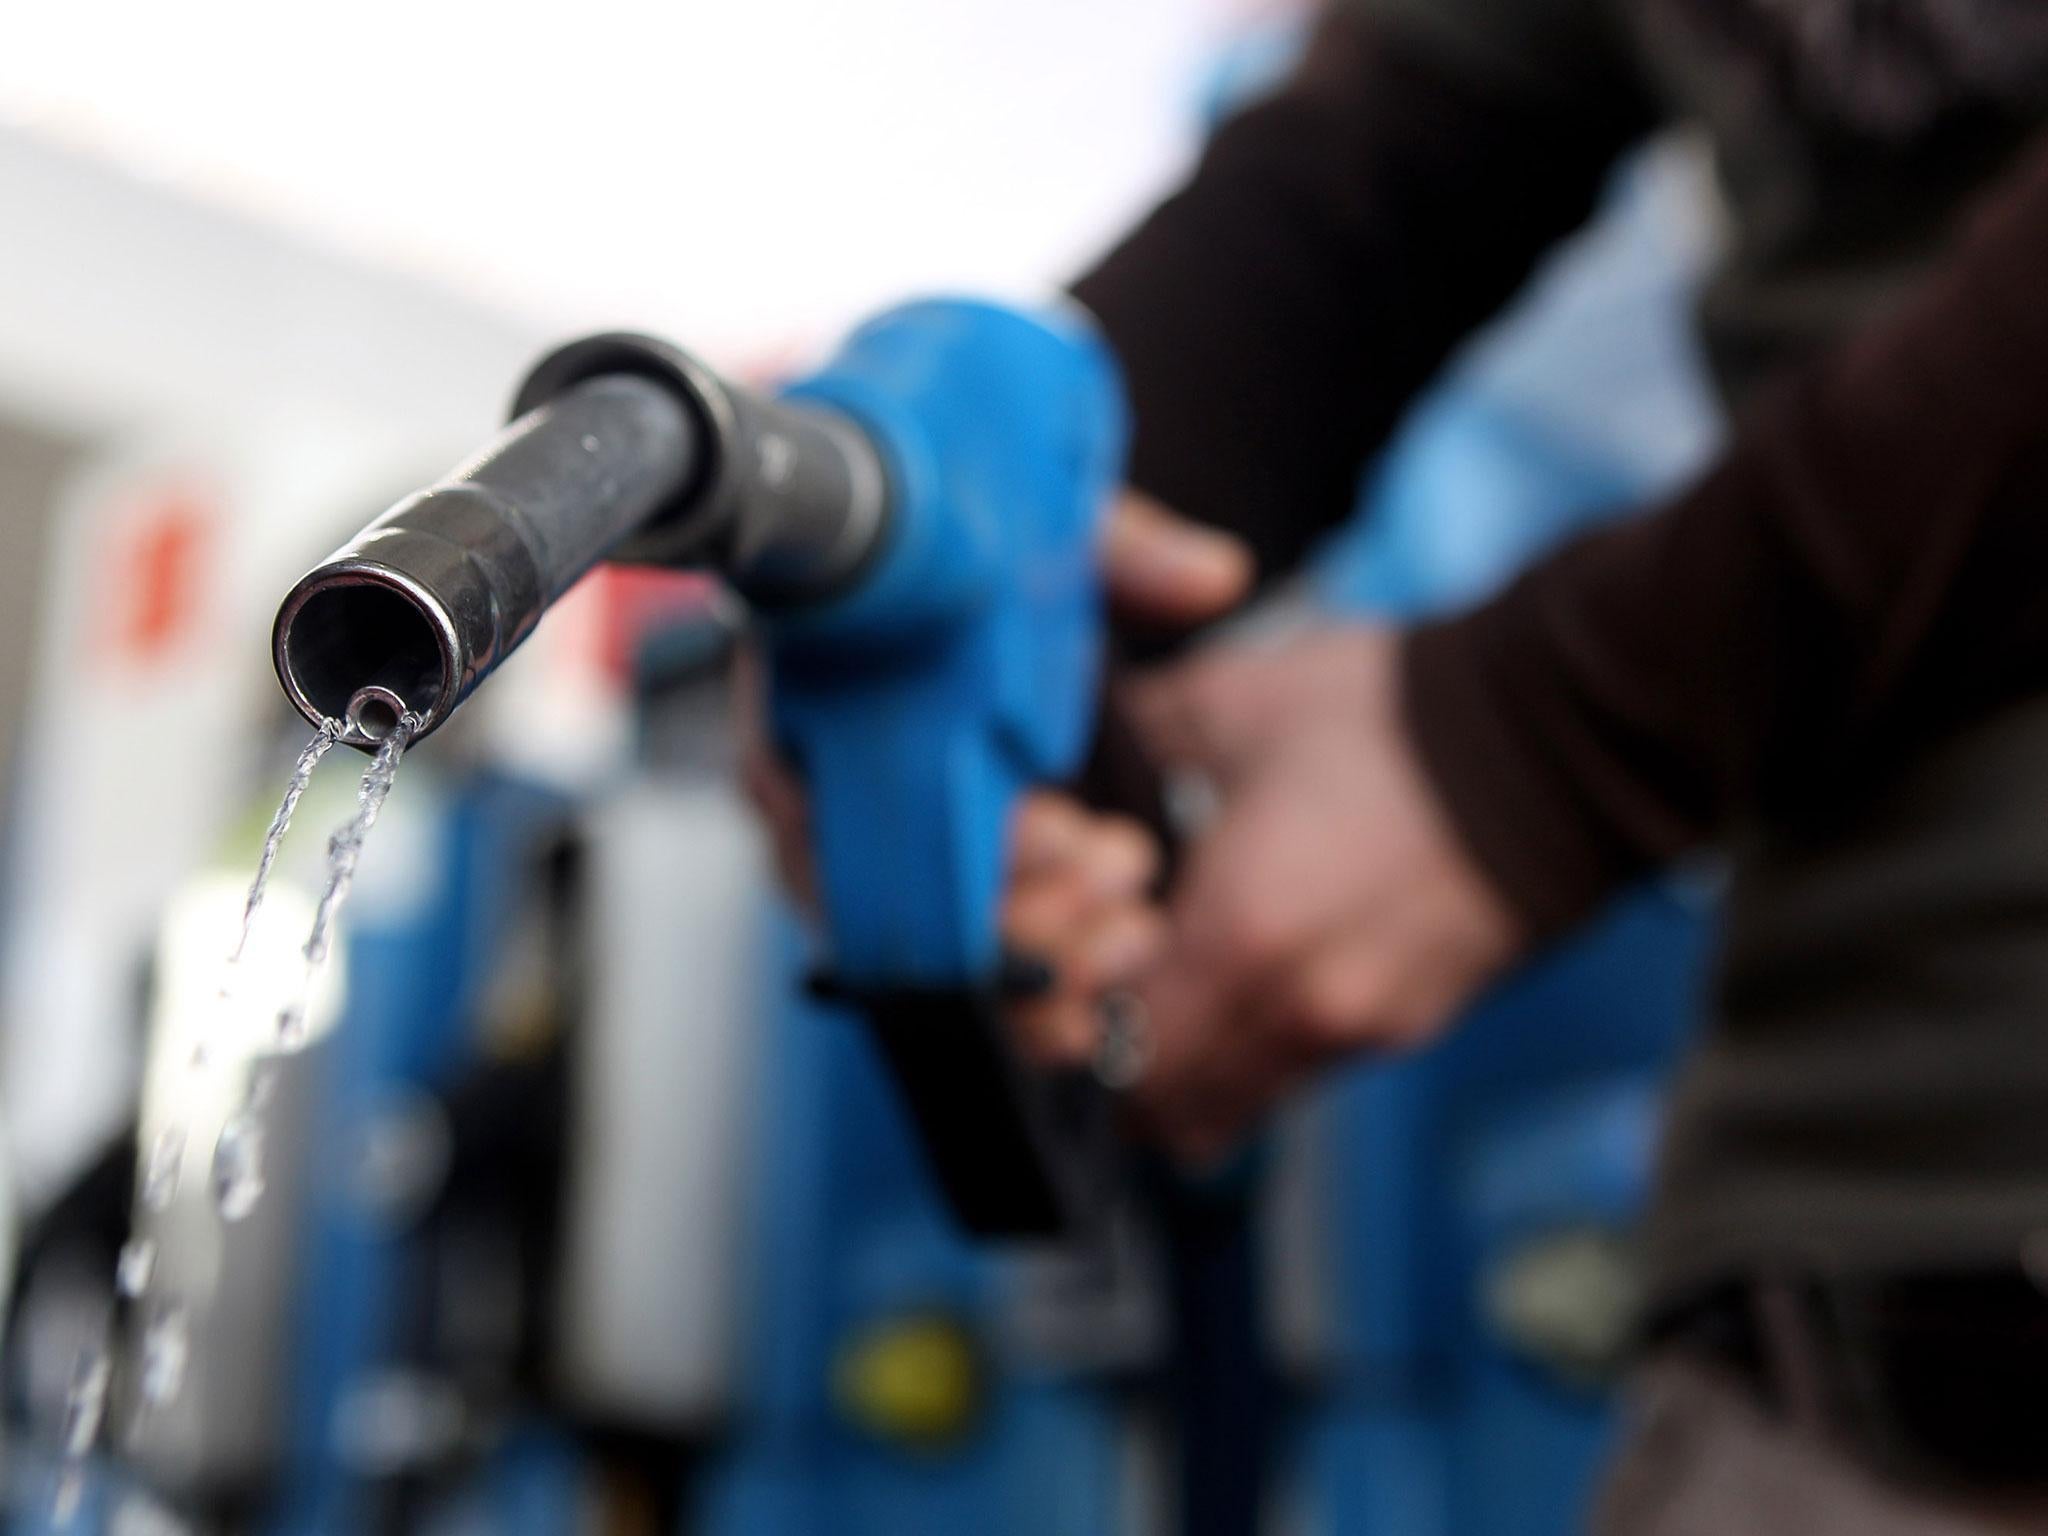 Motorists will see an acceleration in fuel price cuts over the weekend